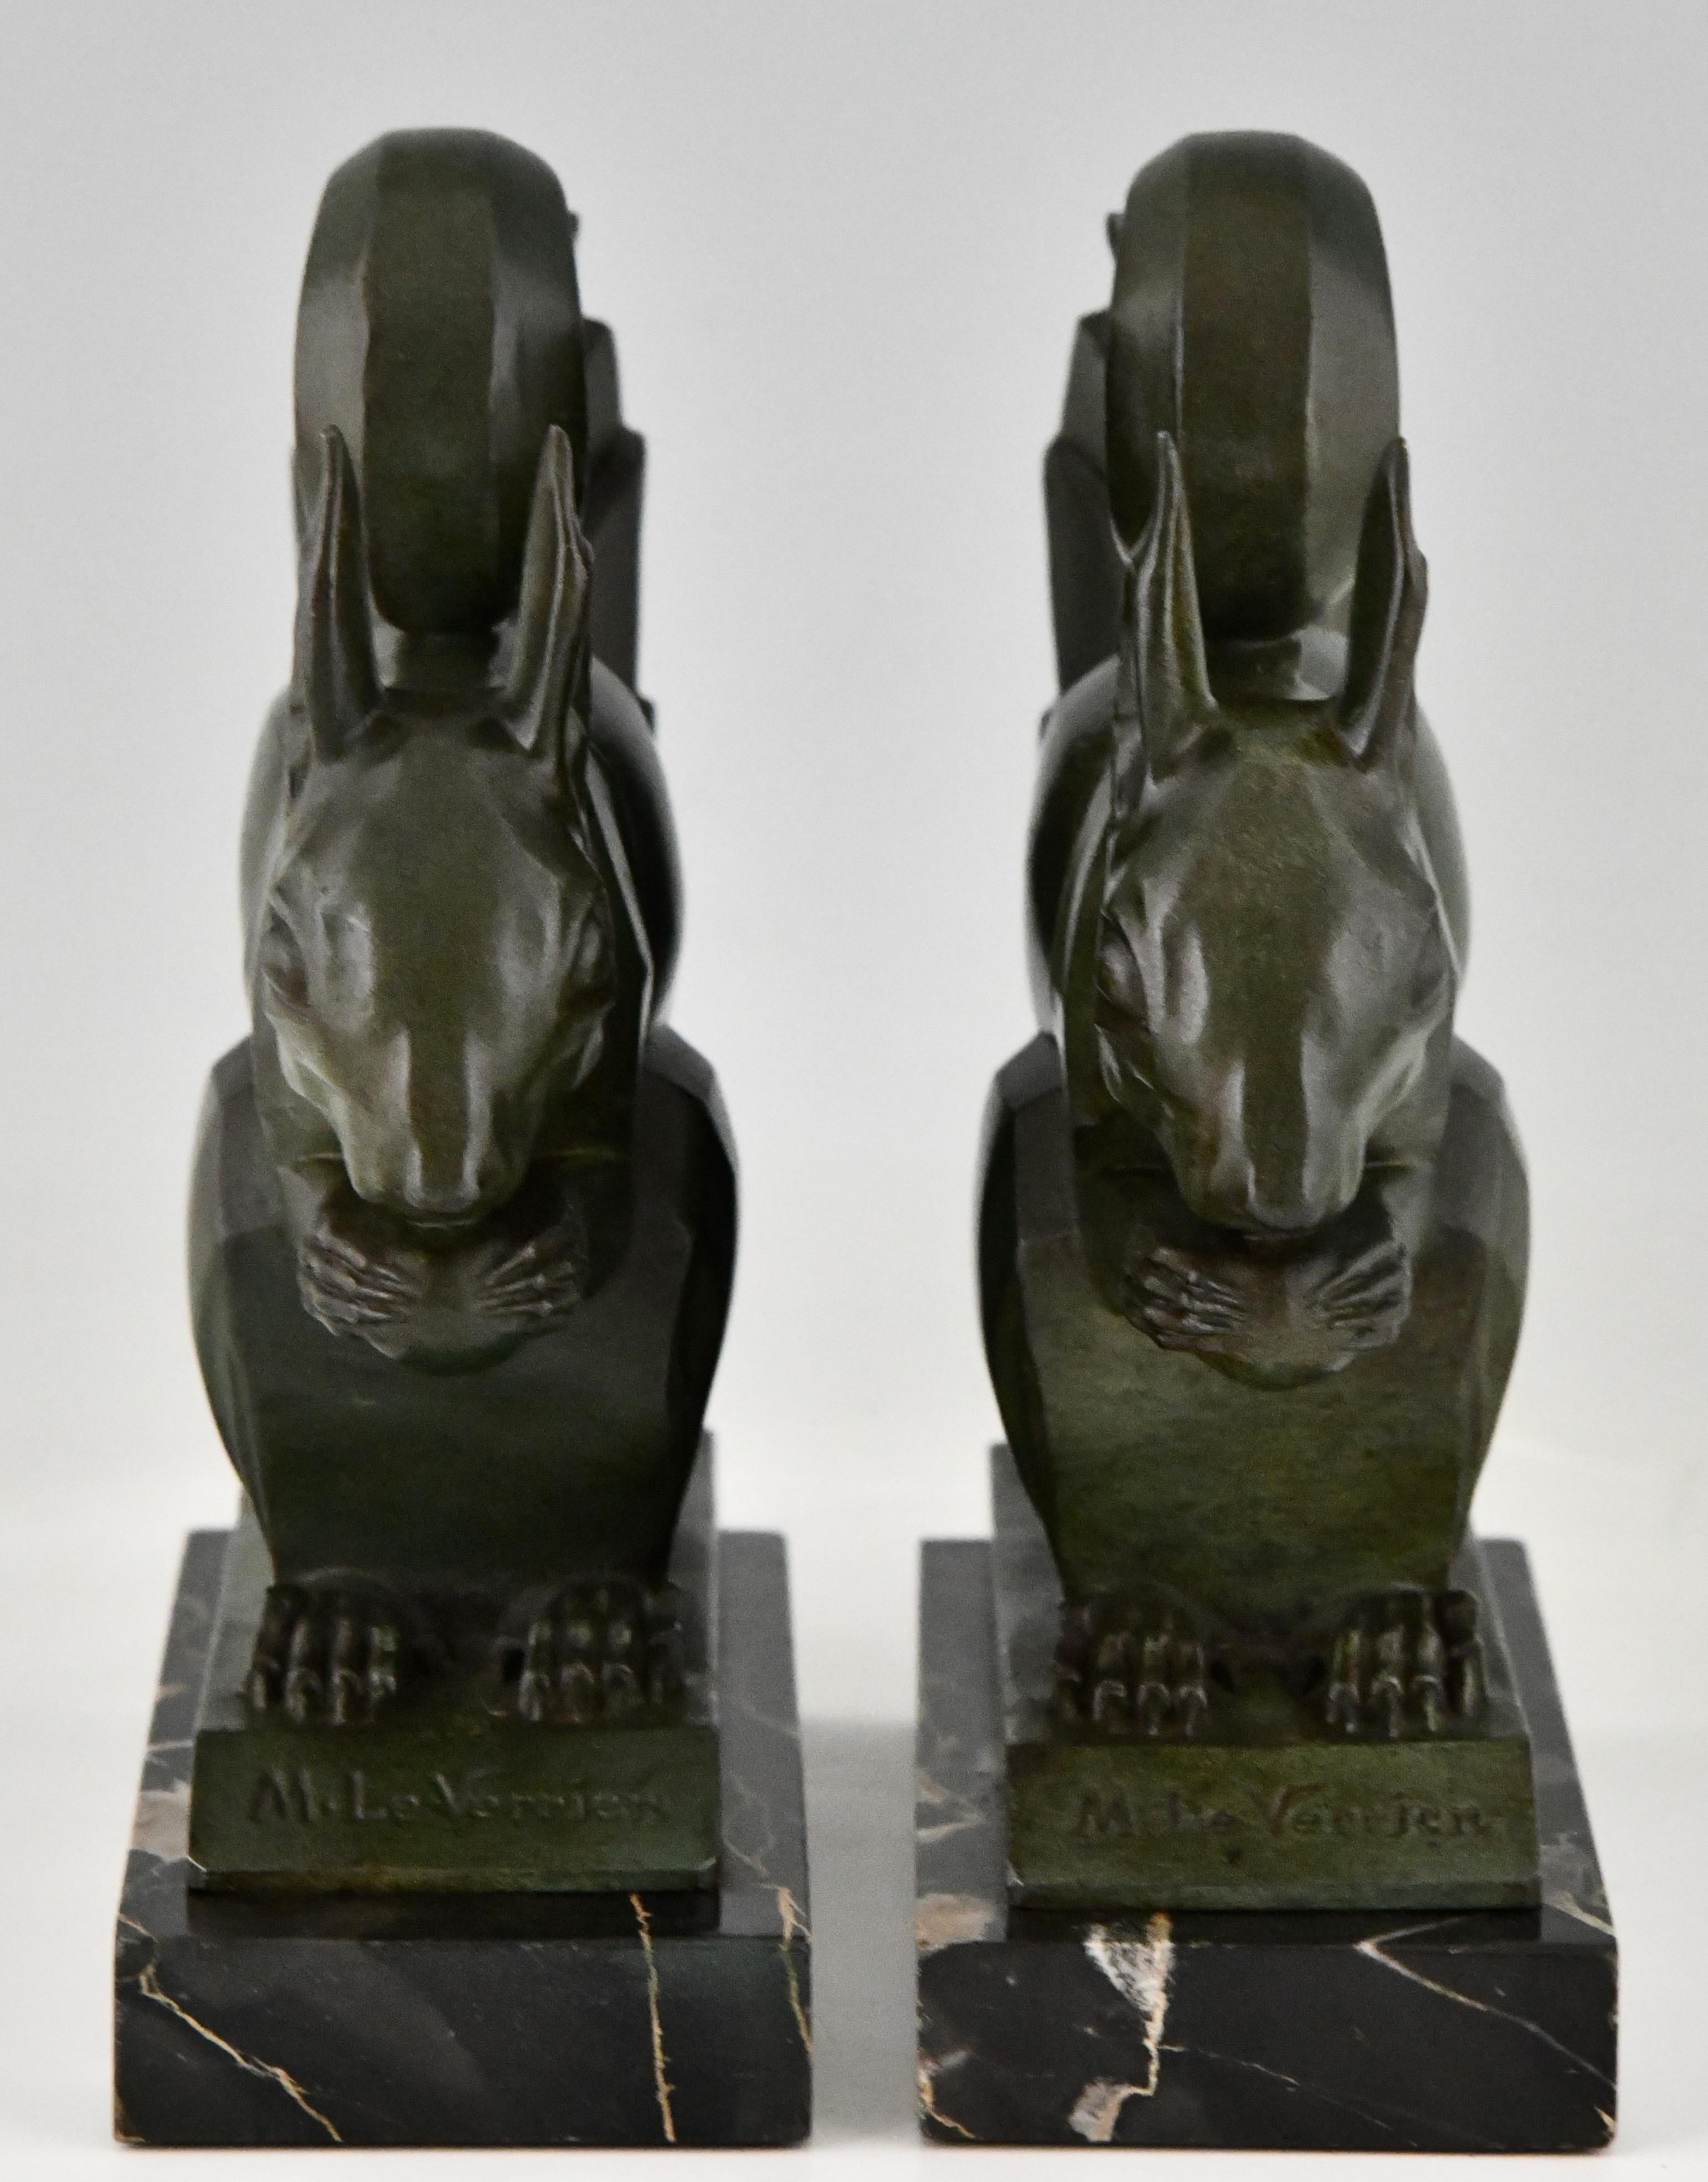 French Art Deco Squirrel Bookends by Max Le Verrier Big Size, France 1930 Original